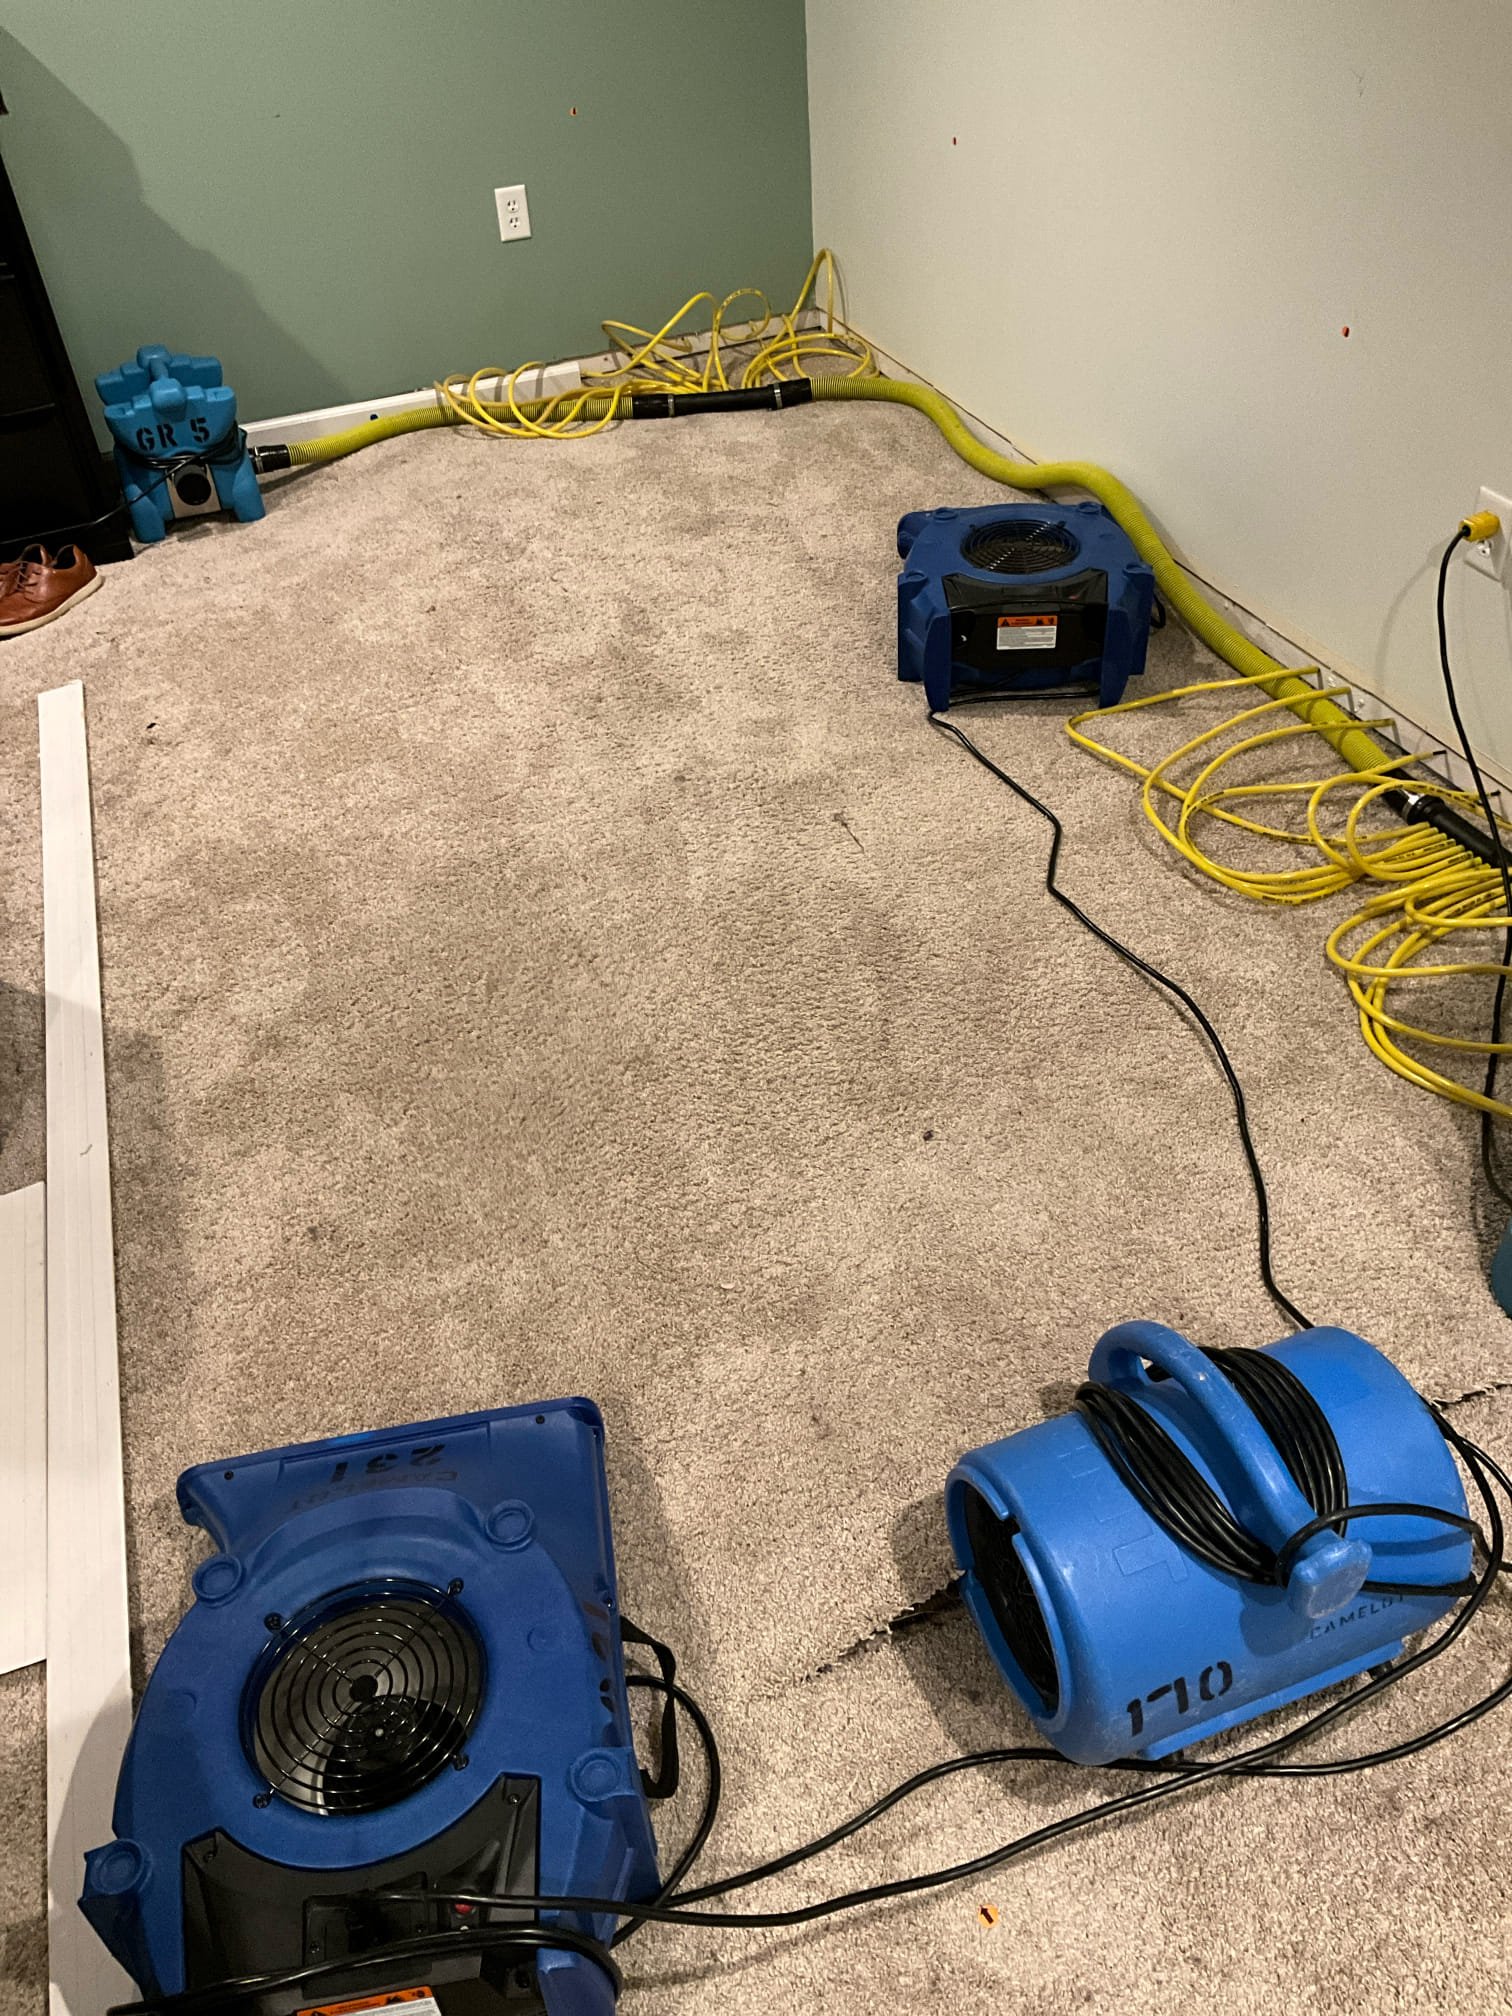 Drying of bedroom after water pump overflow